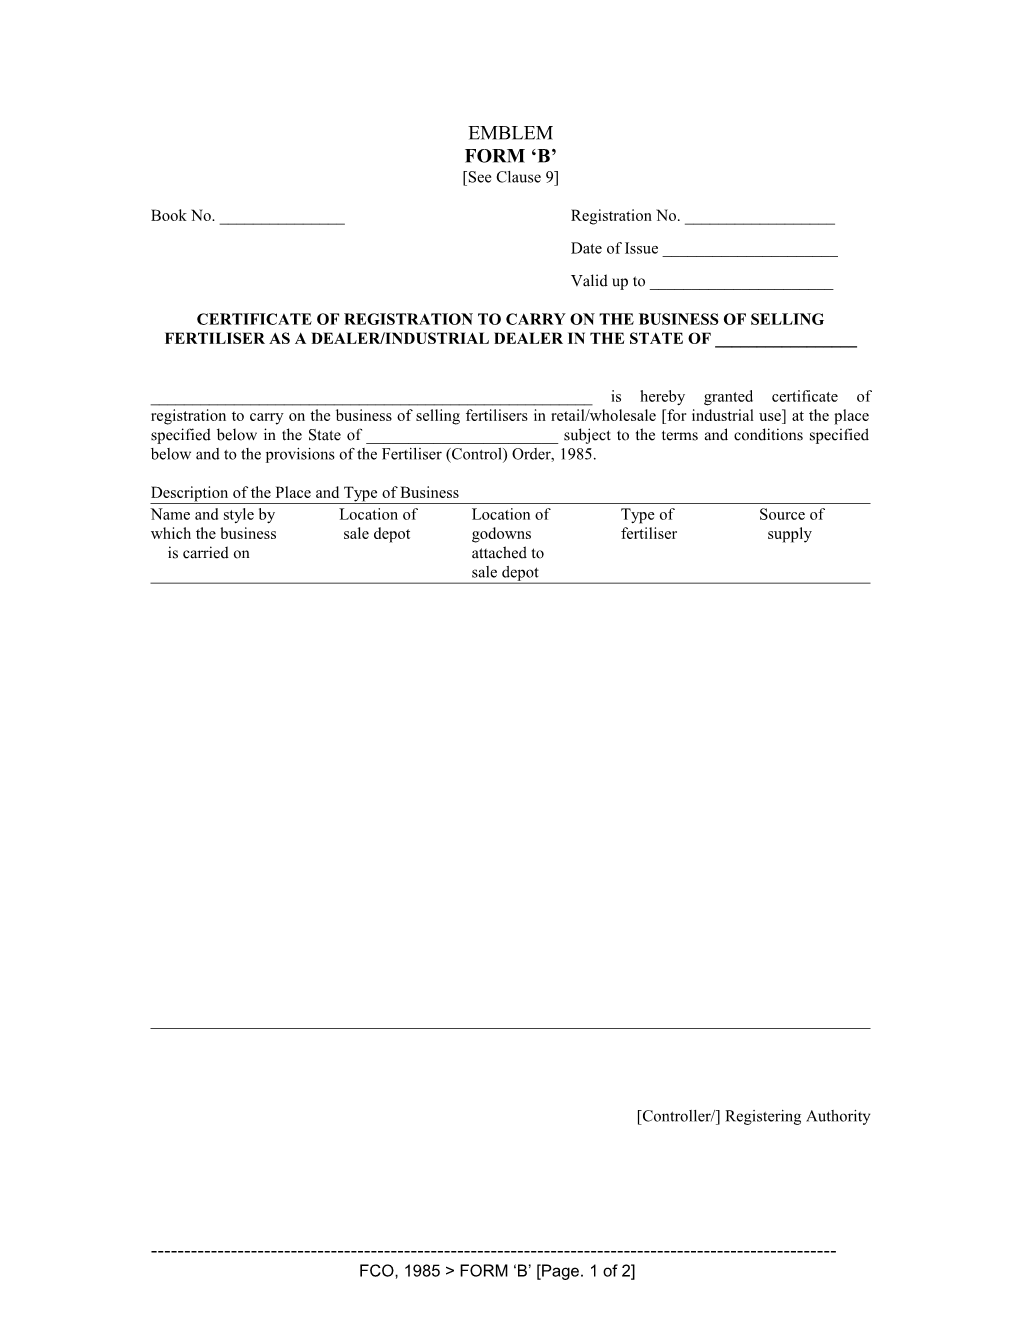 Certificate of Registration to Carry on the Business of Selling Fertiliser As A